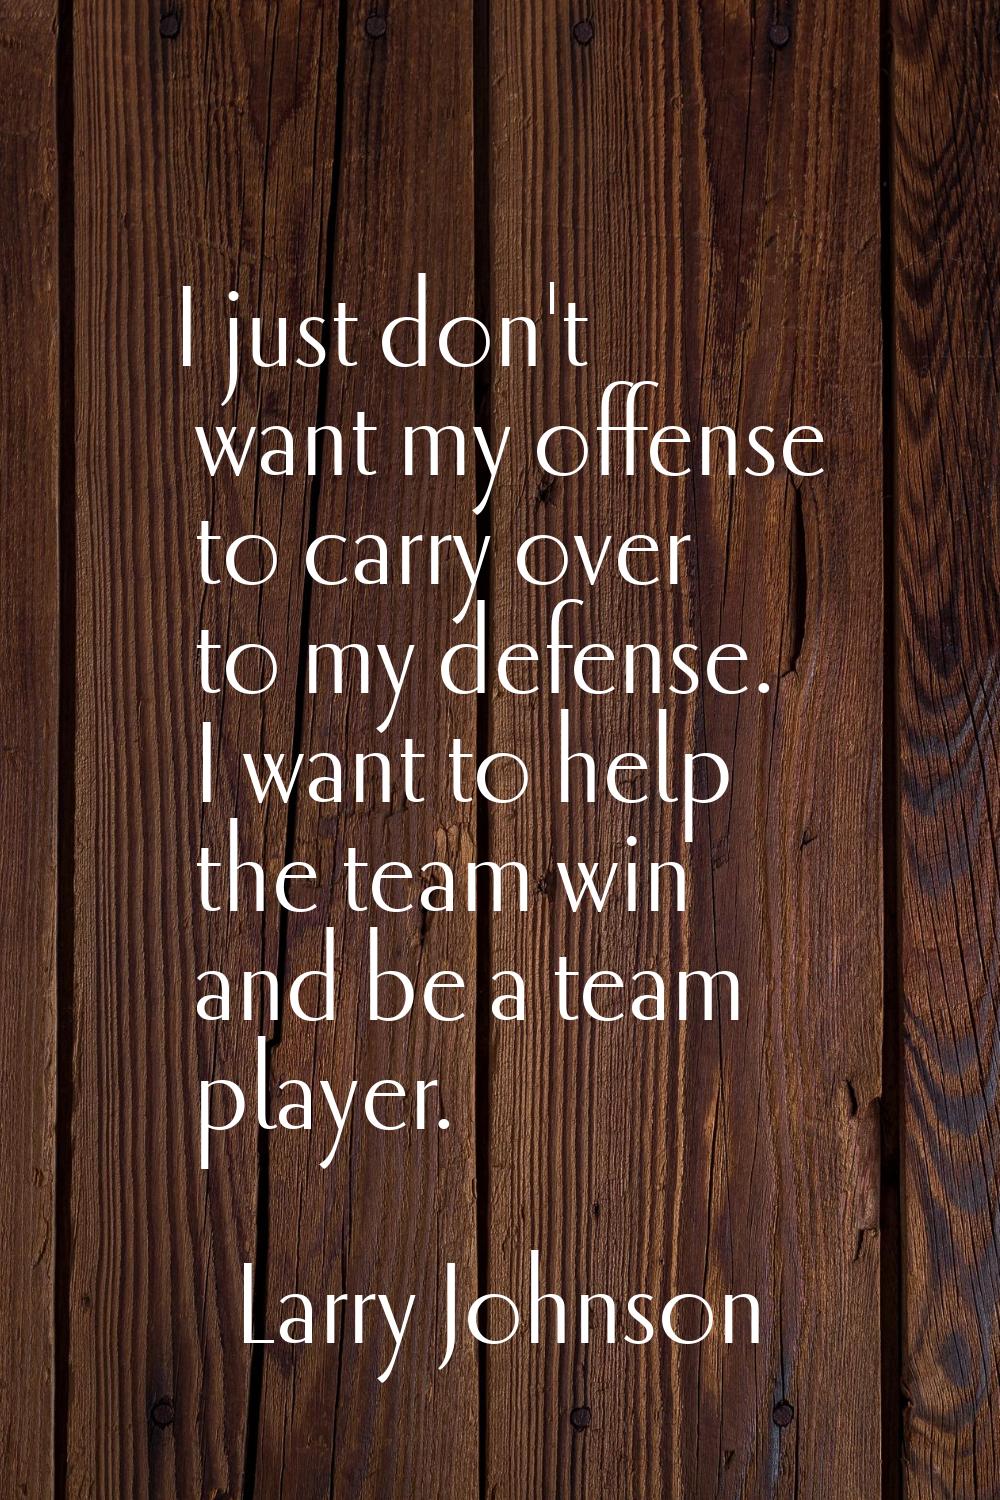 I just don't want my offense to carry over to my defense. I want to help the team win and be a team